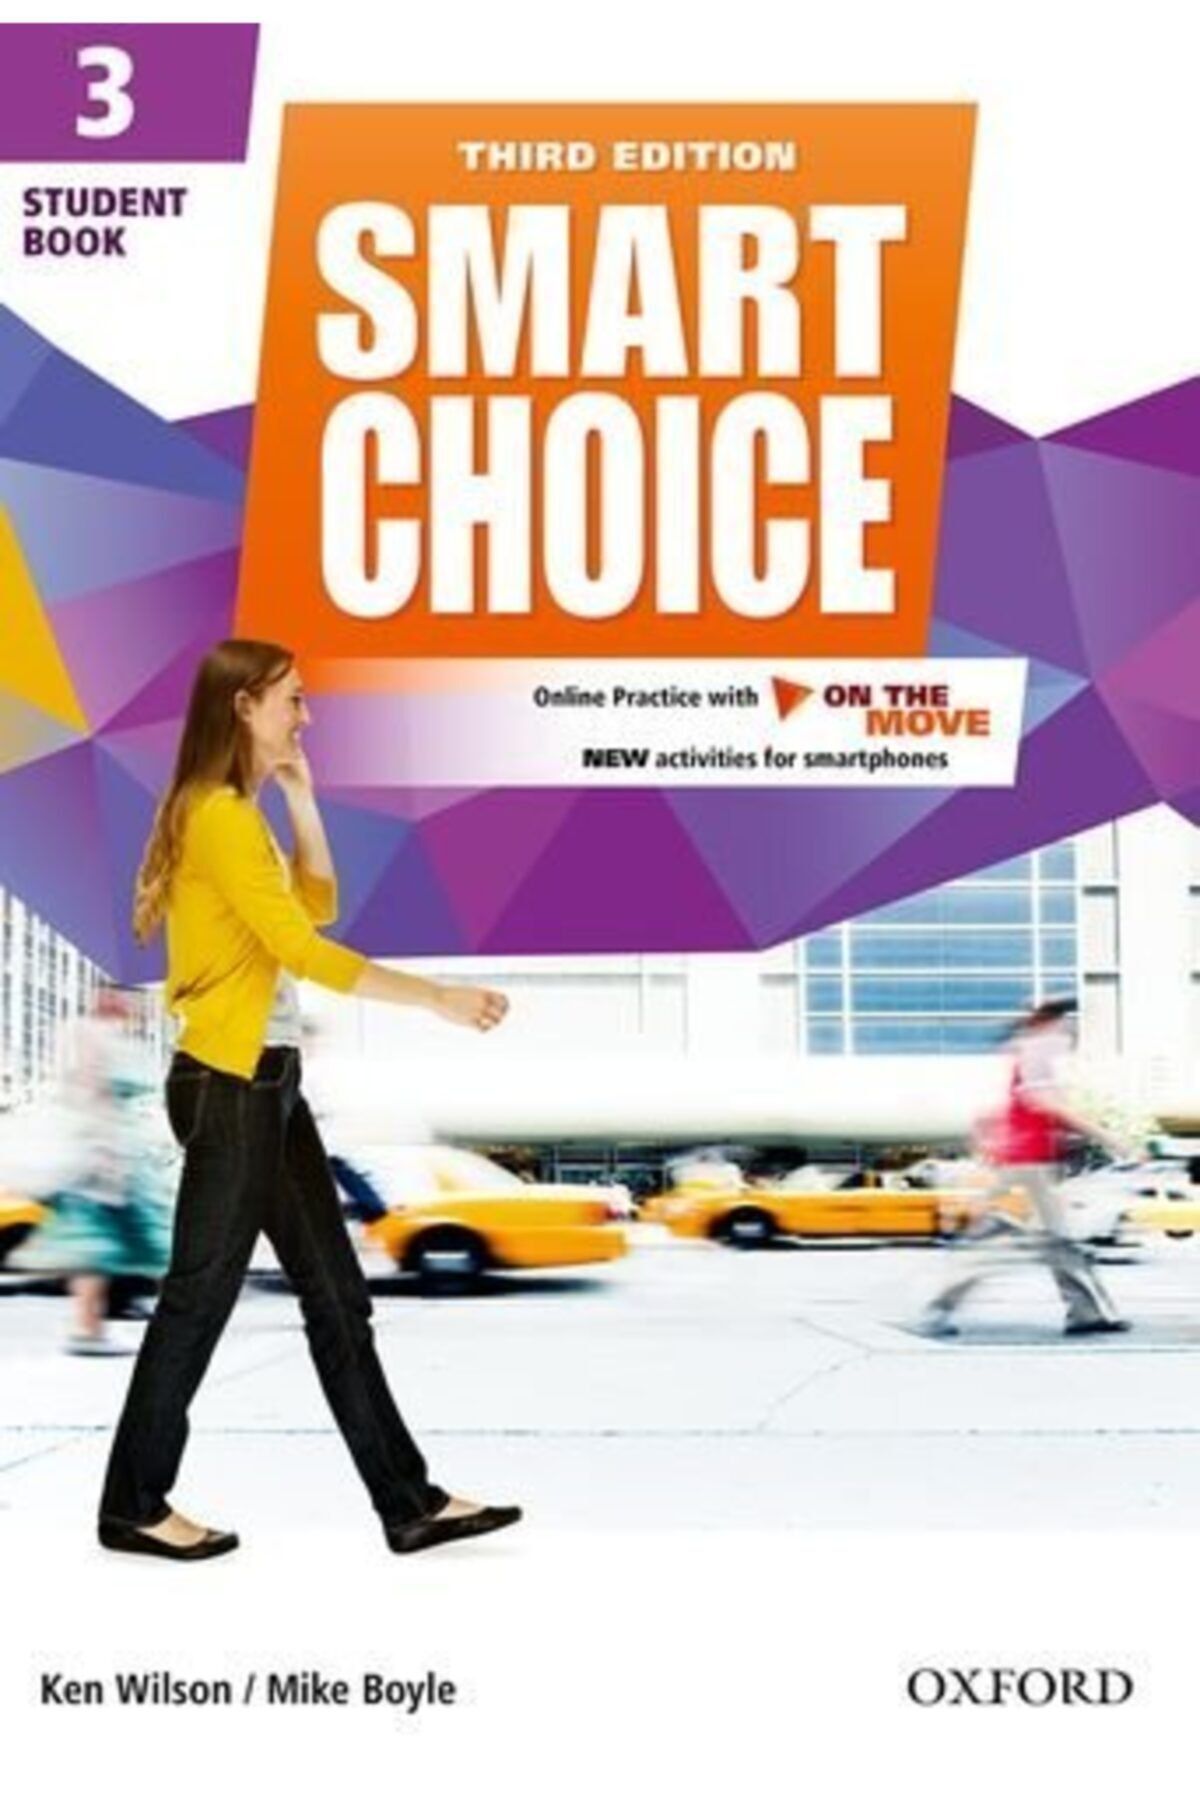 Own it student book. Oxford Smart choice third Edition. Smart choice 3: Workbook. Smart choice 2: Workbook. Smart English book.